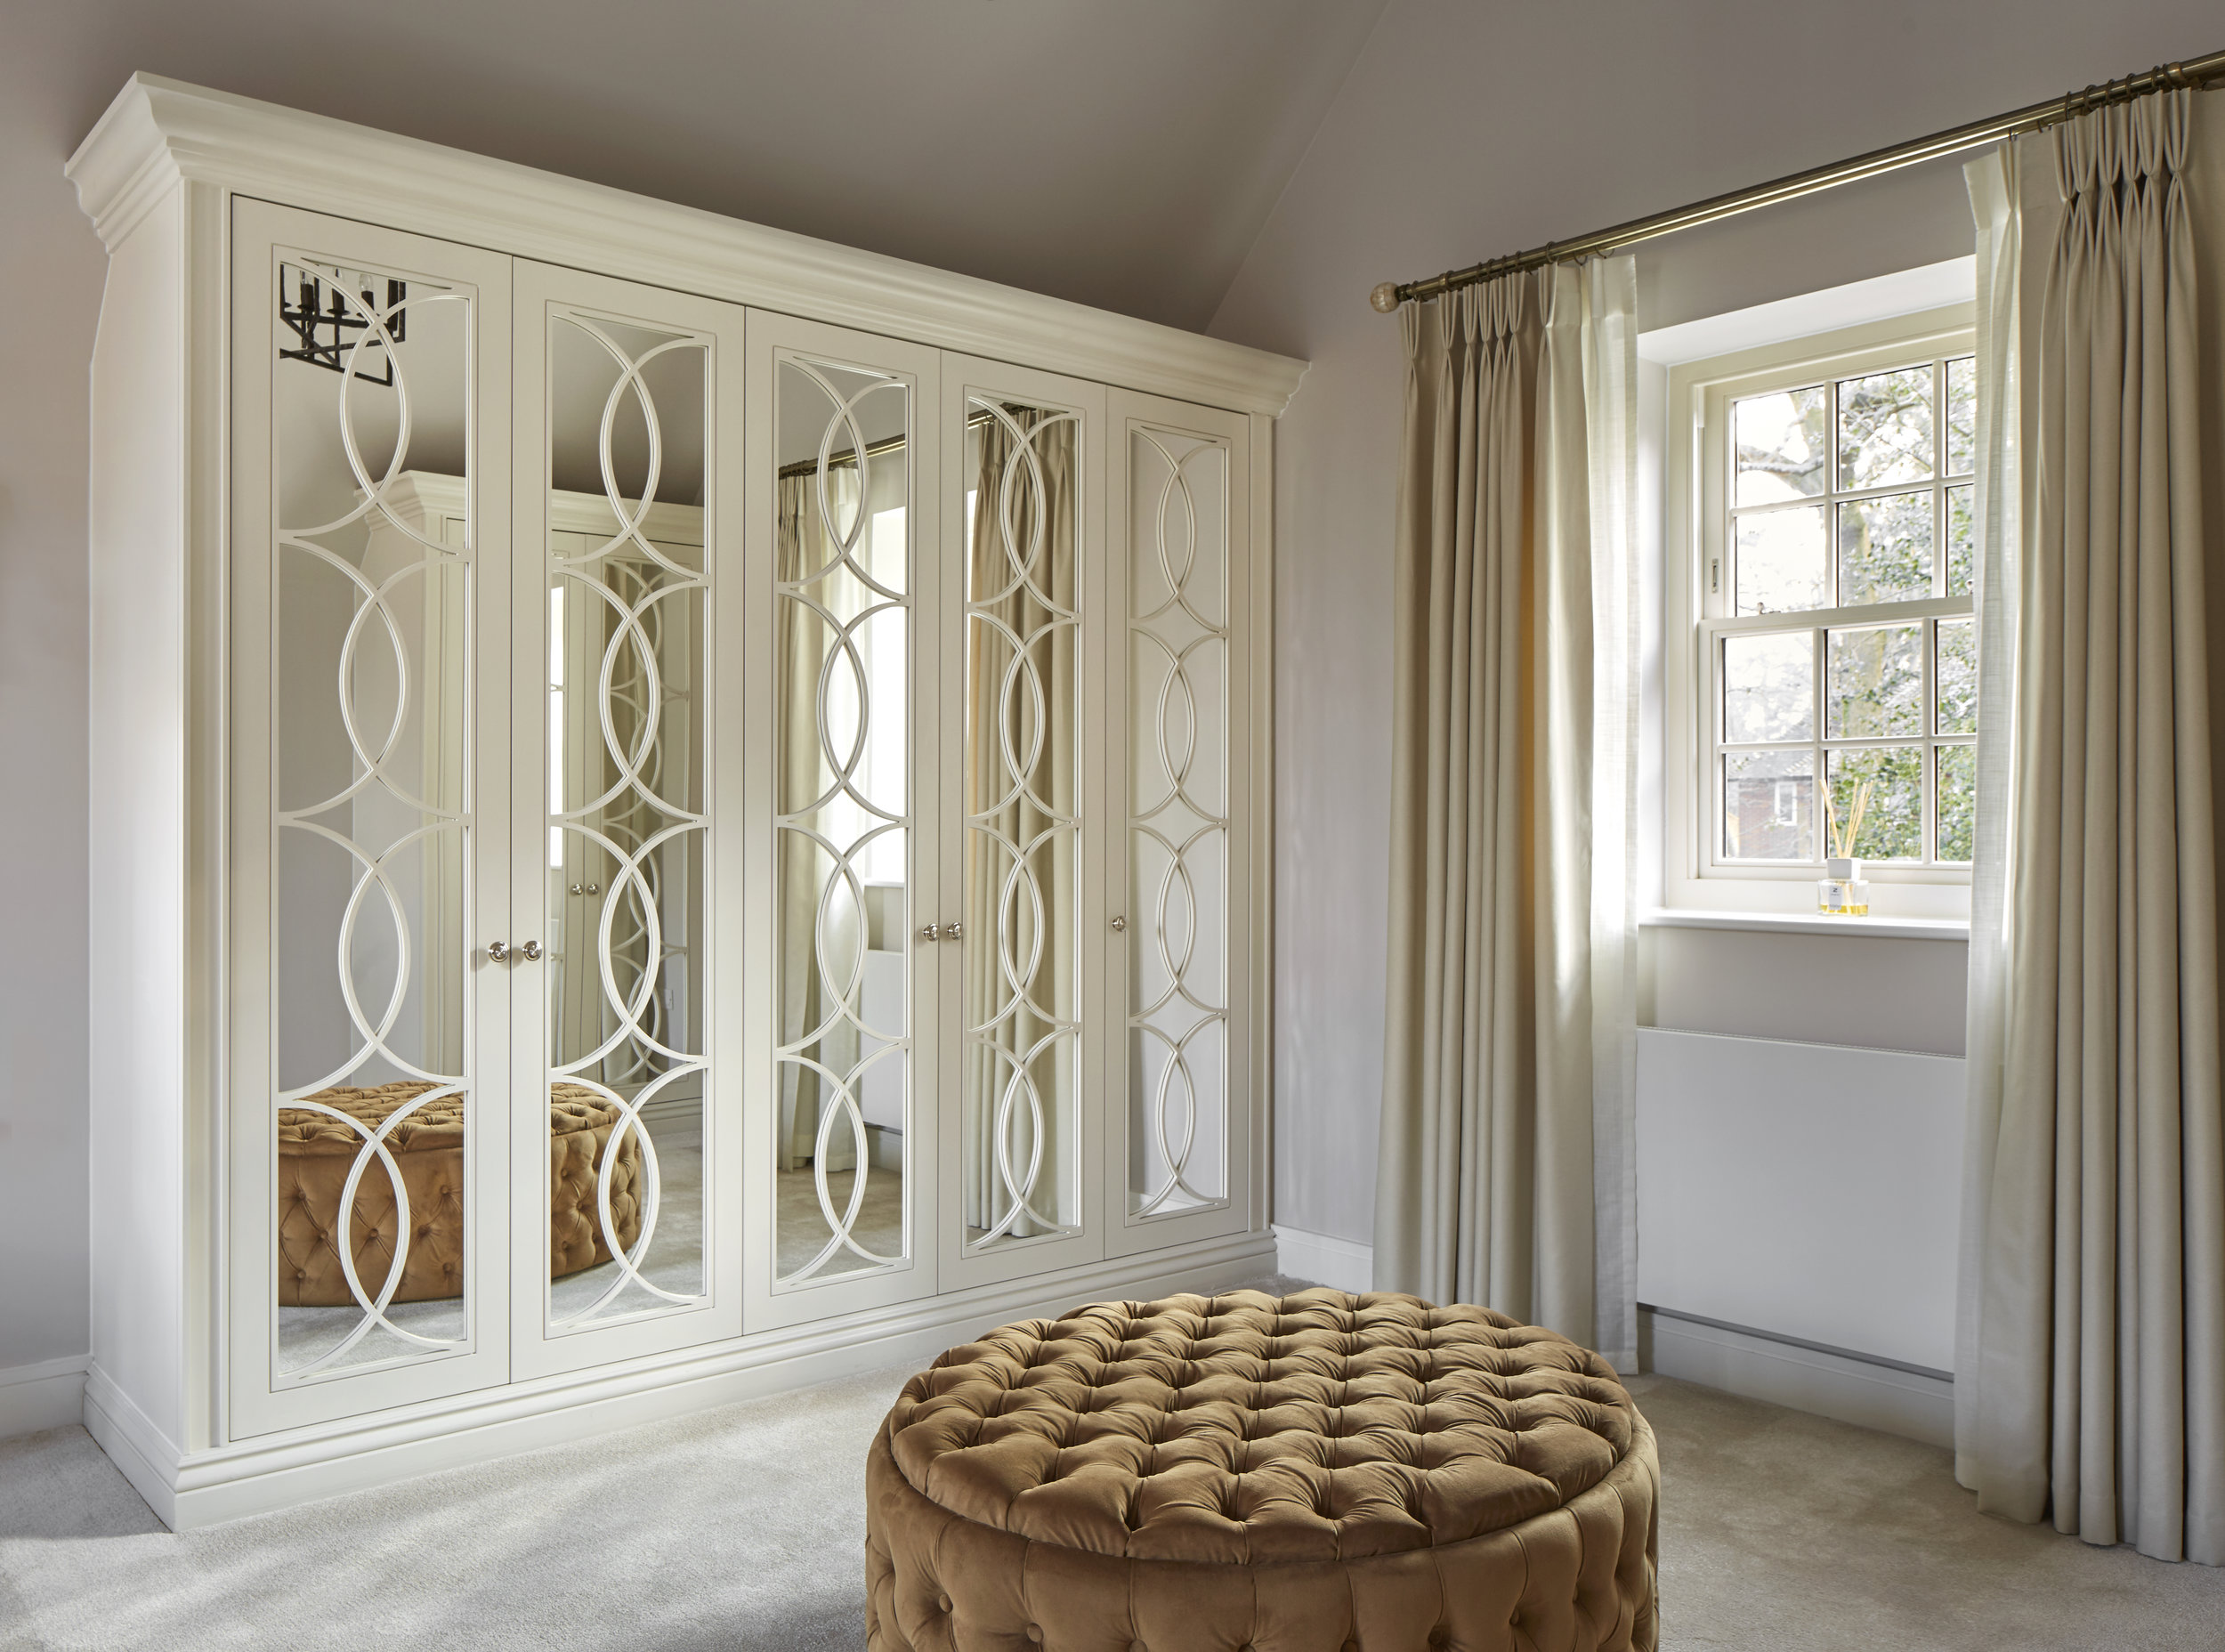 E Luxury Fitted Wardrobes - Empire Style - The Heritage Wardrobe Company.jpg